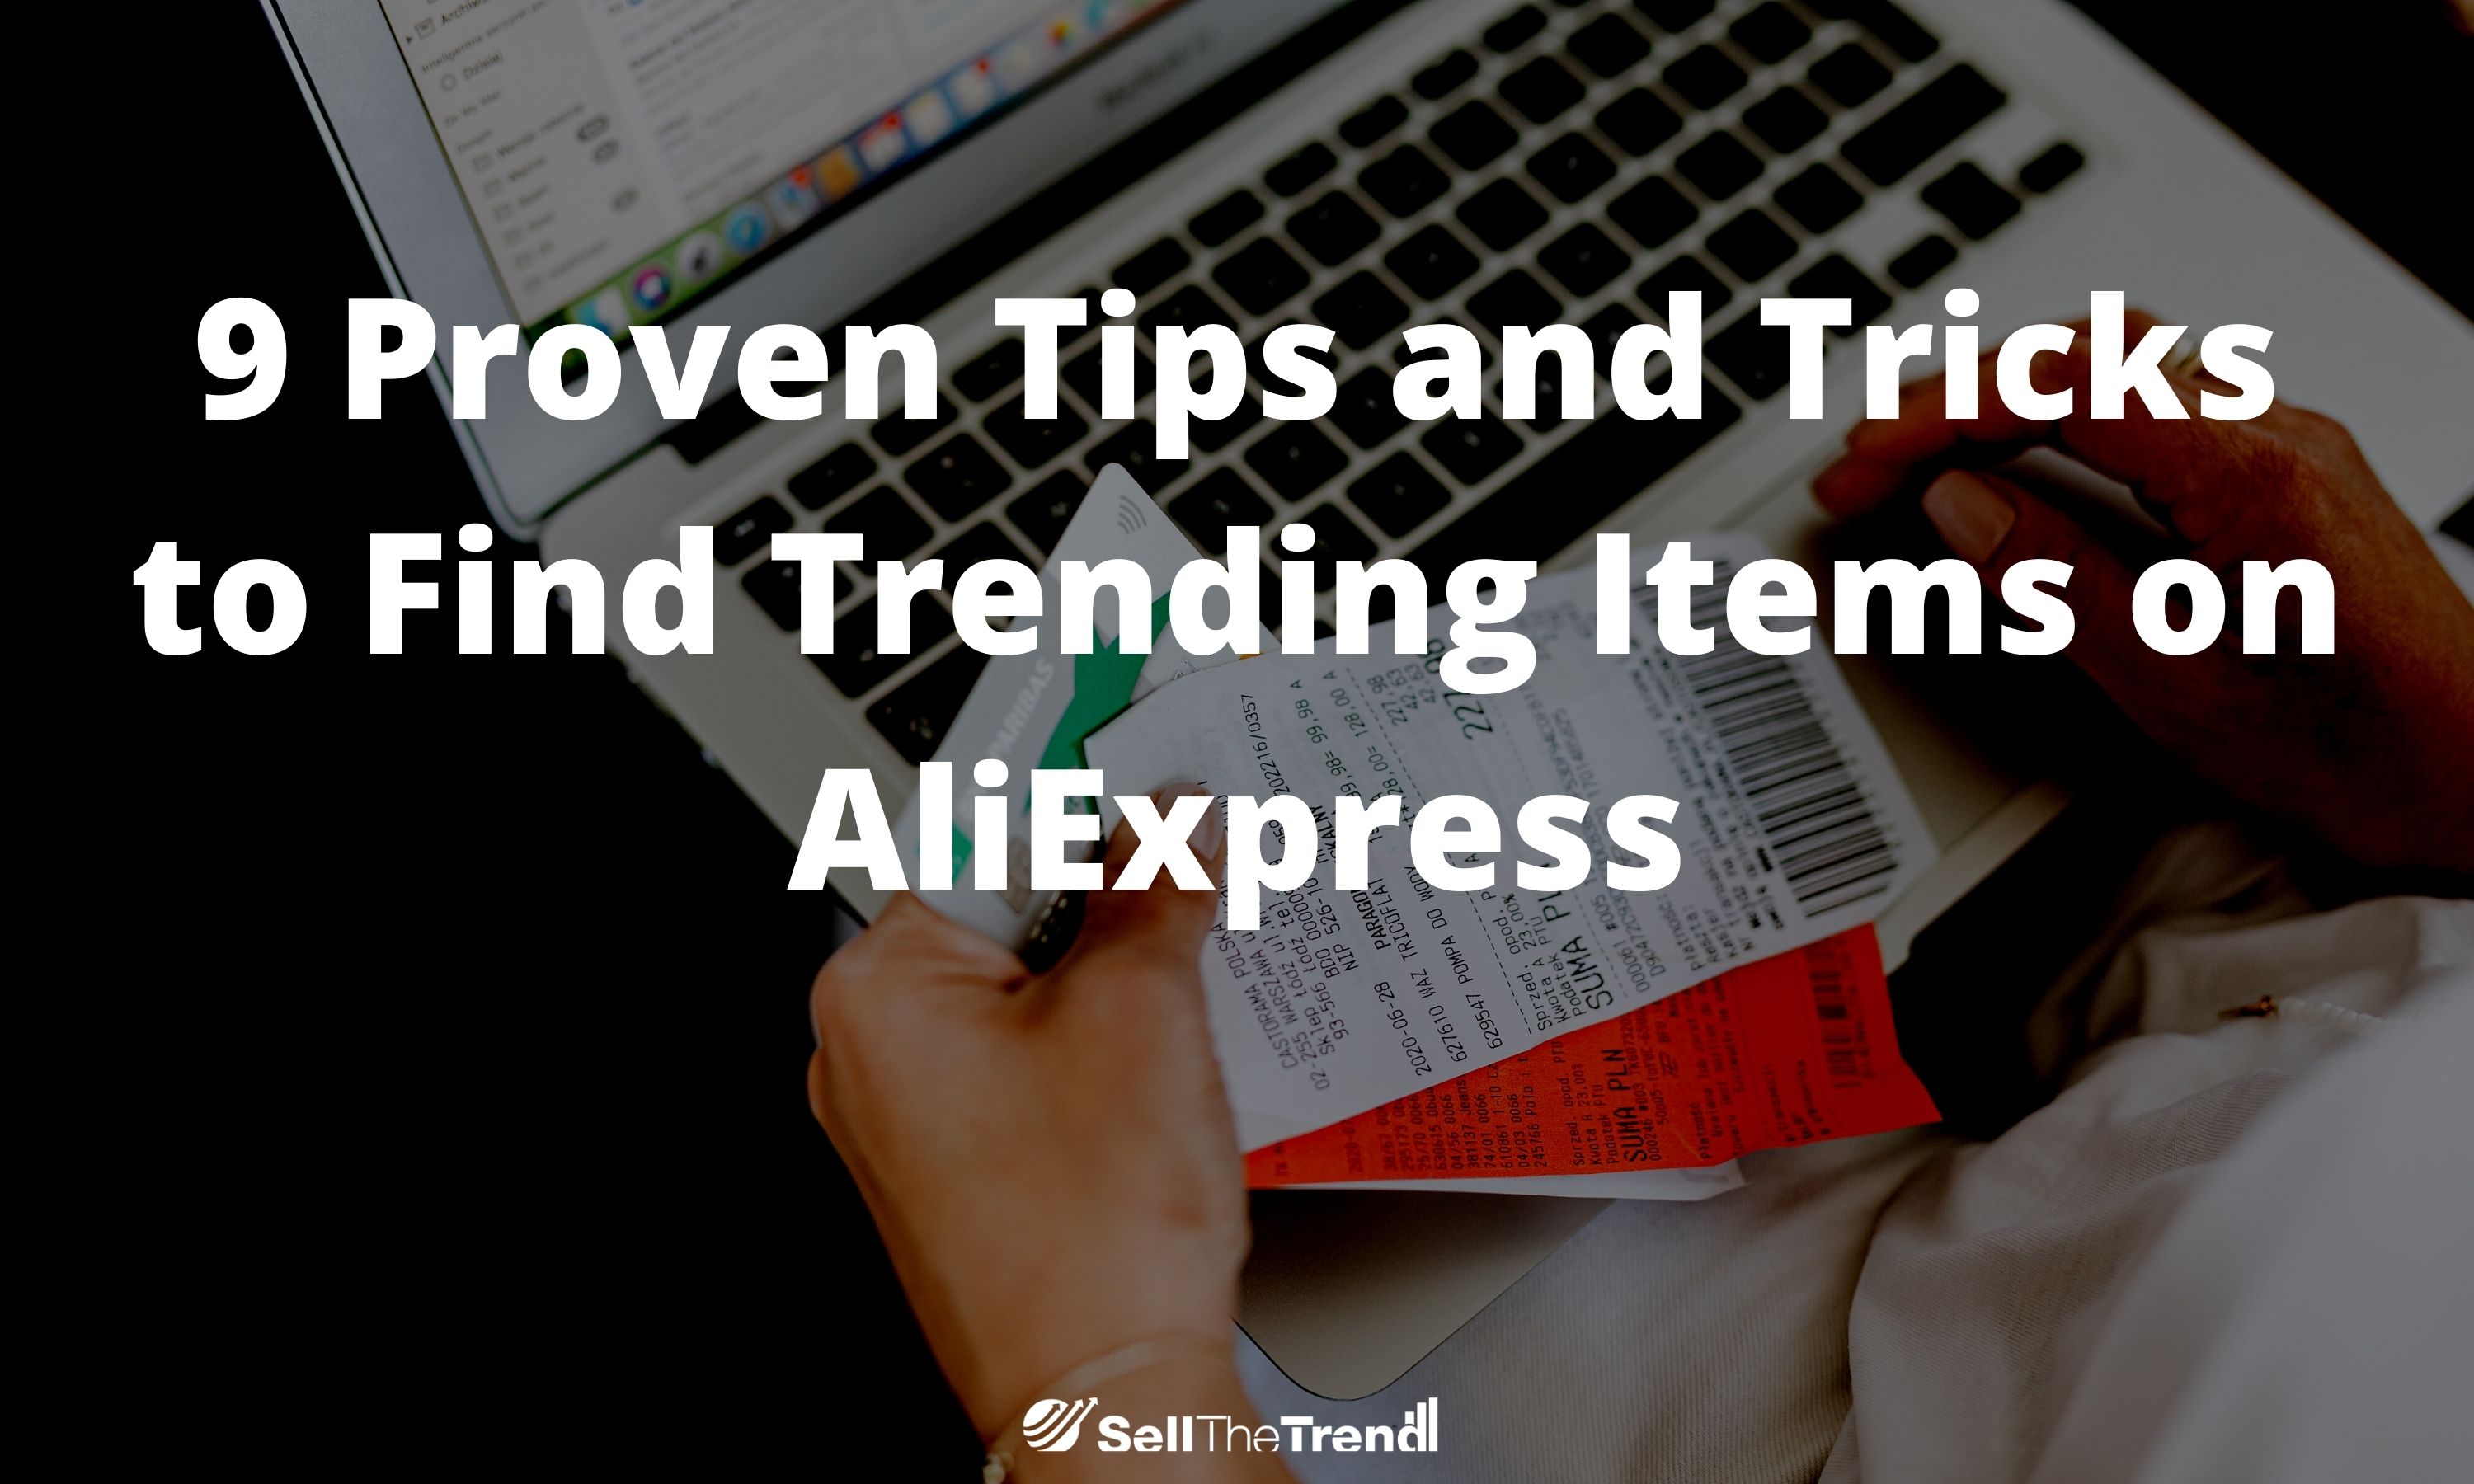 9 Proven Tips & Tricks to Find Trending Items on AliExpress